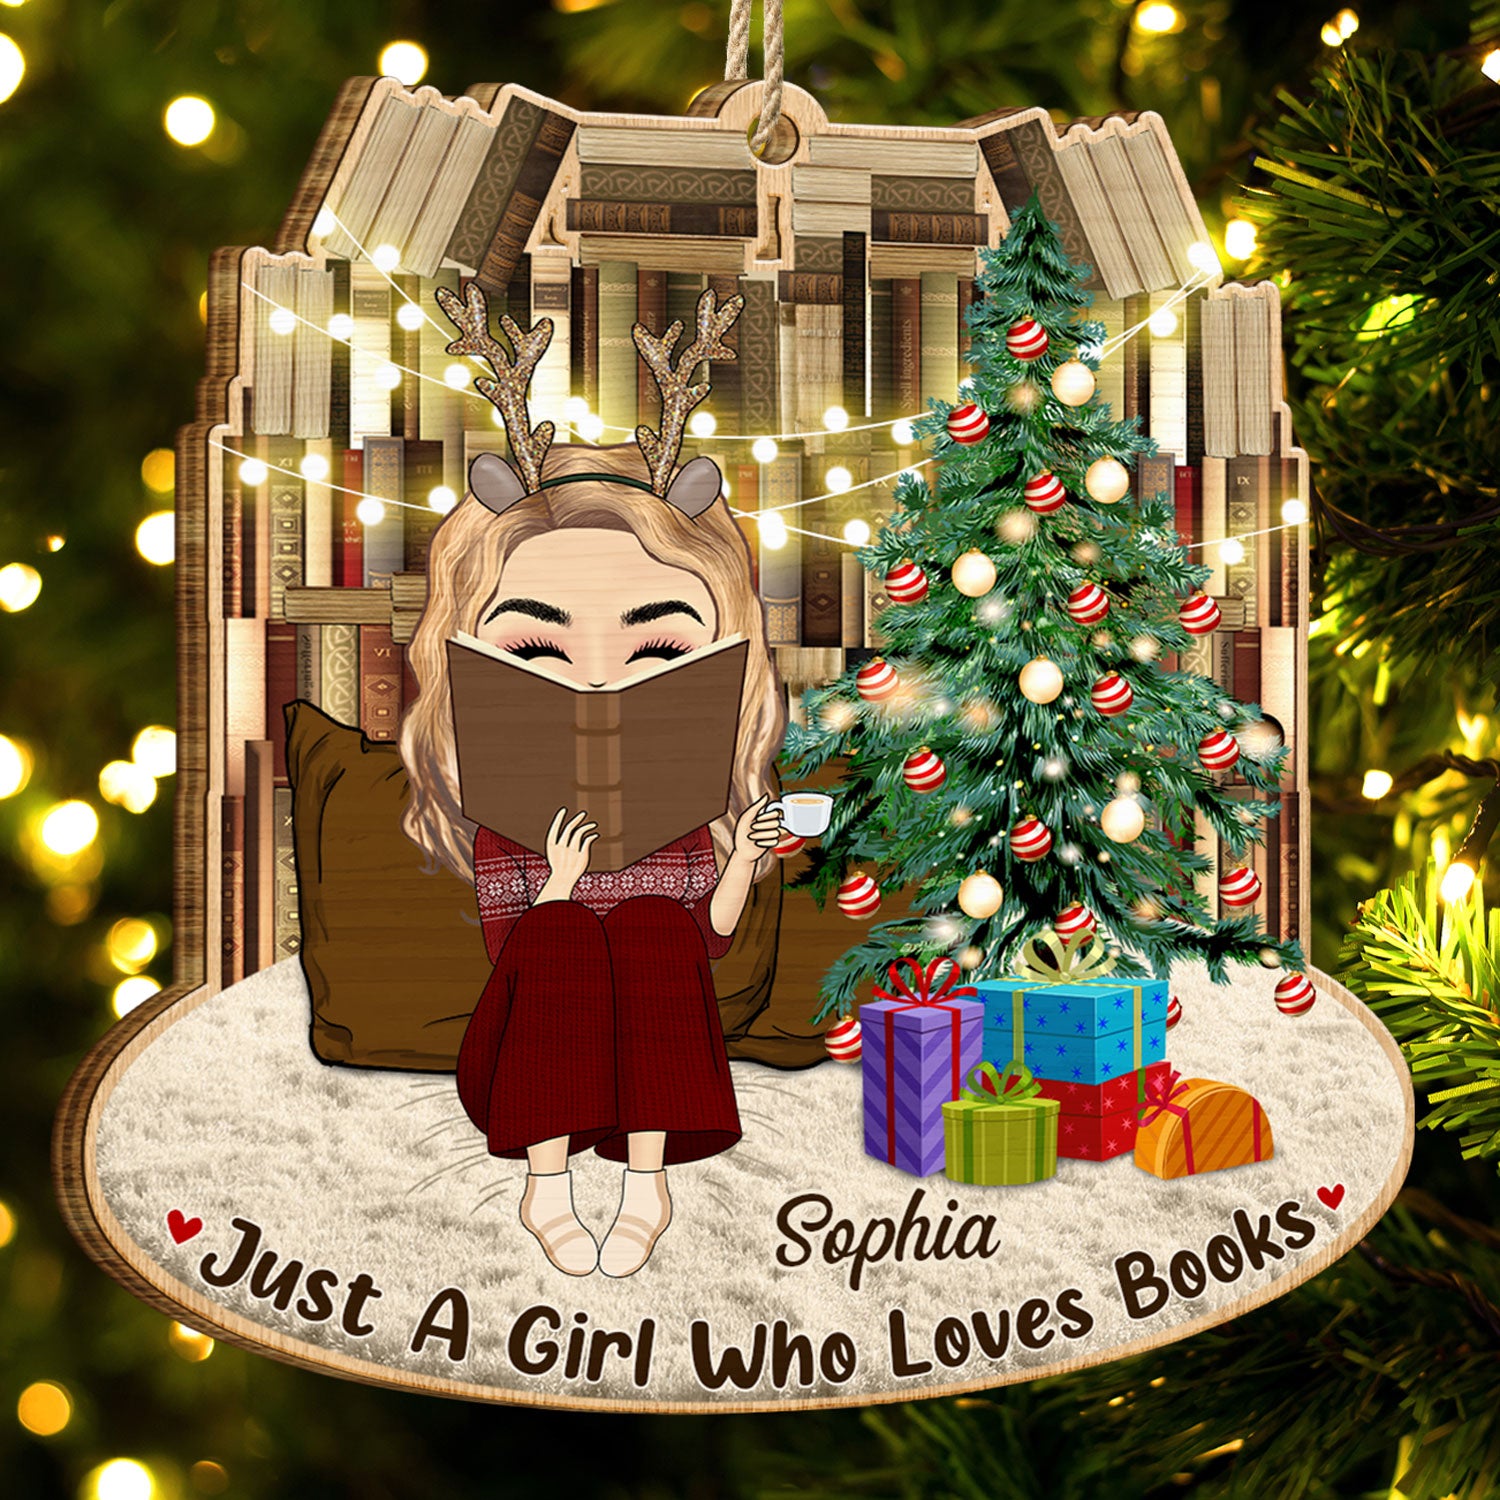 Just A Girl Who Loves Books - Christmas Gift For Reading Lovers - Personalized Custom Shaped Wooden Ornament